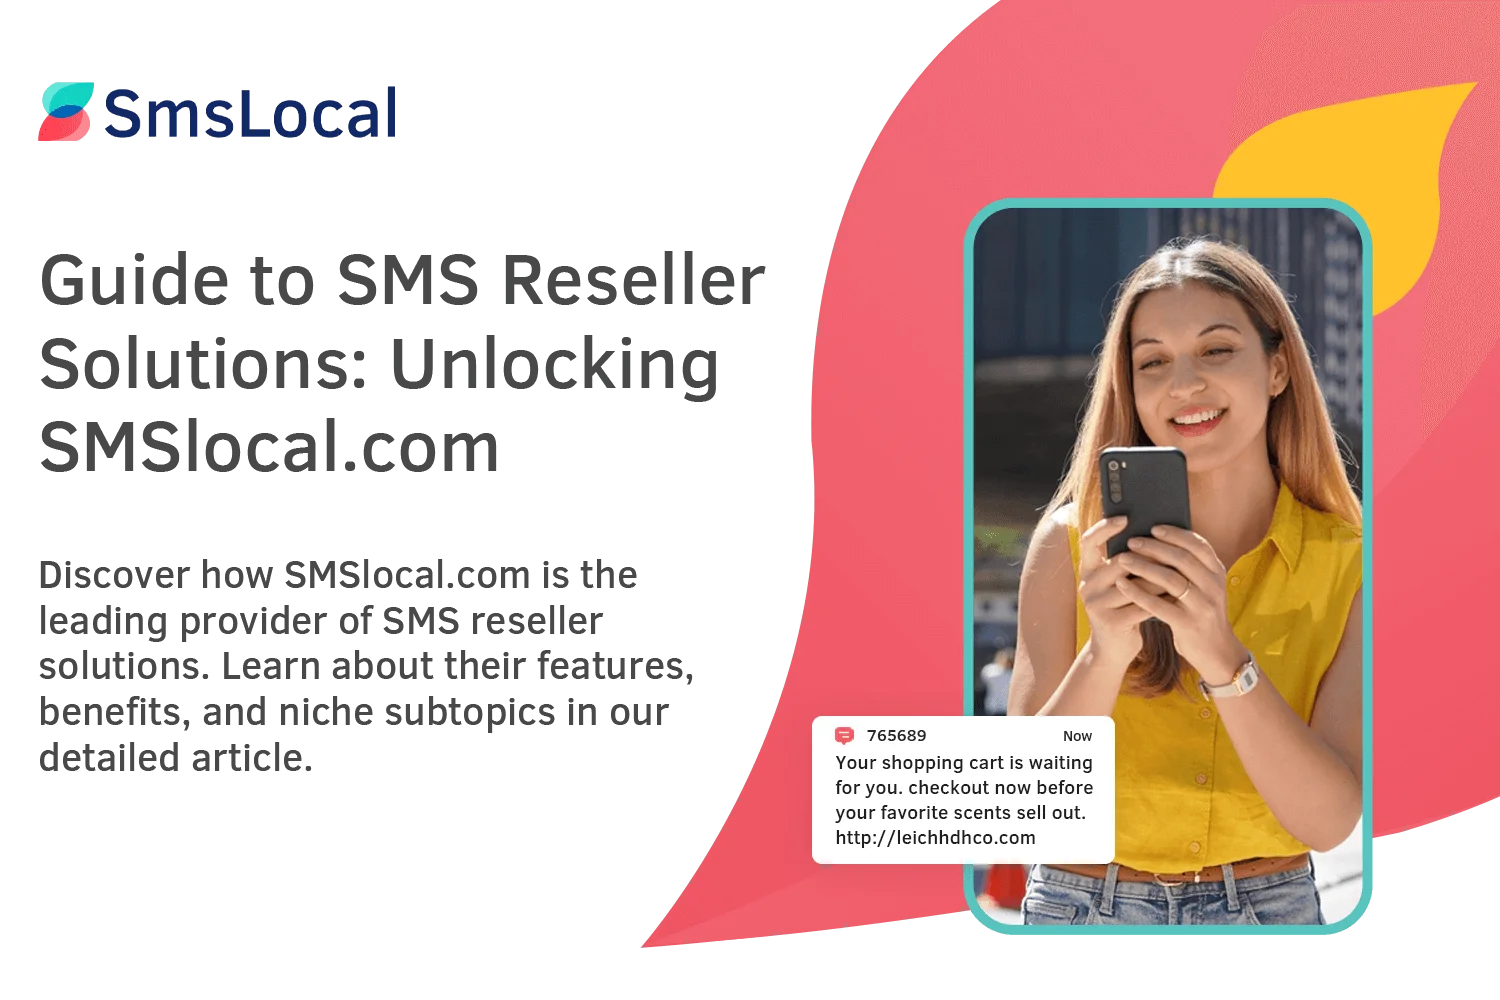 Guide-to-SMS-Reseller-Solutions-Unlocking-SMSlocal-1 (1)